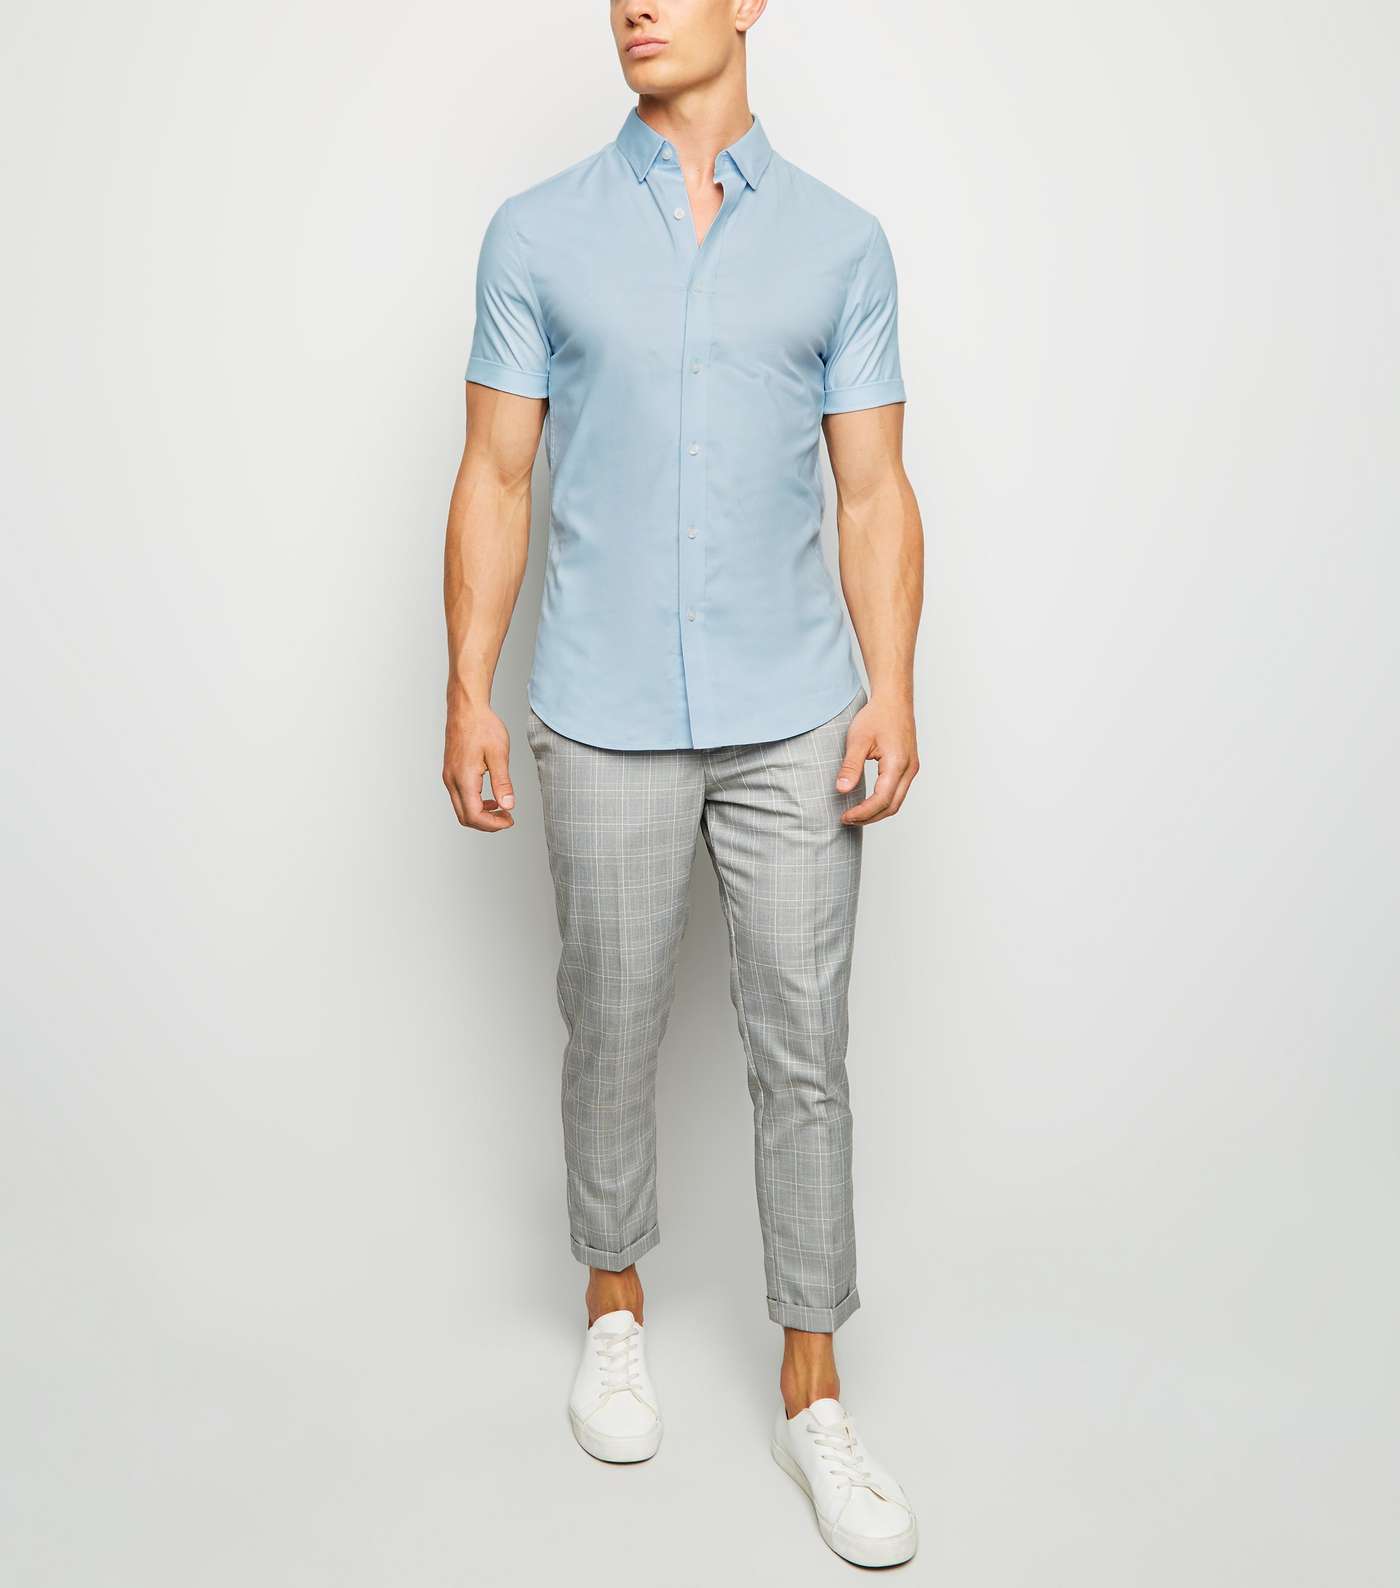 Pale Blue Short Sleeve Muscle Fit Oxford Shirt Image 2